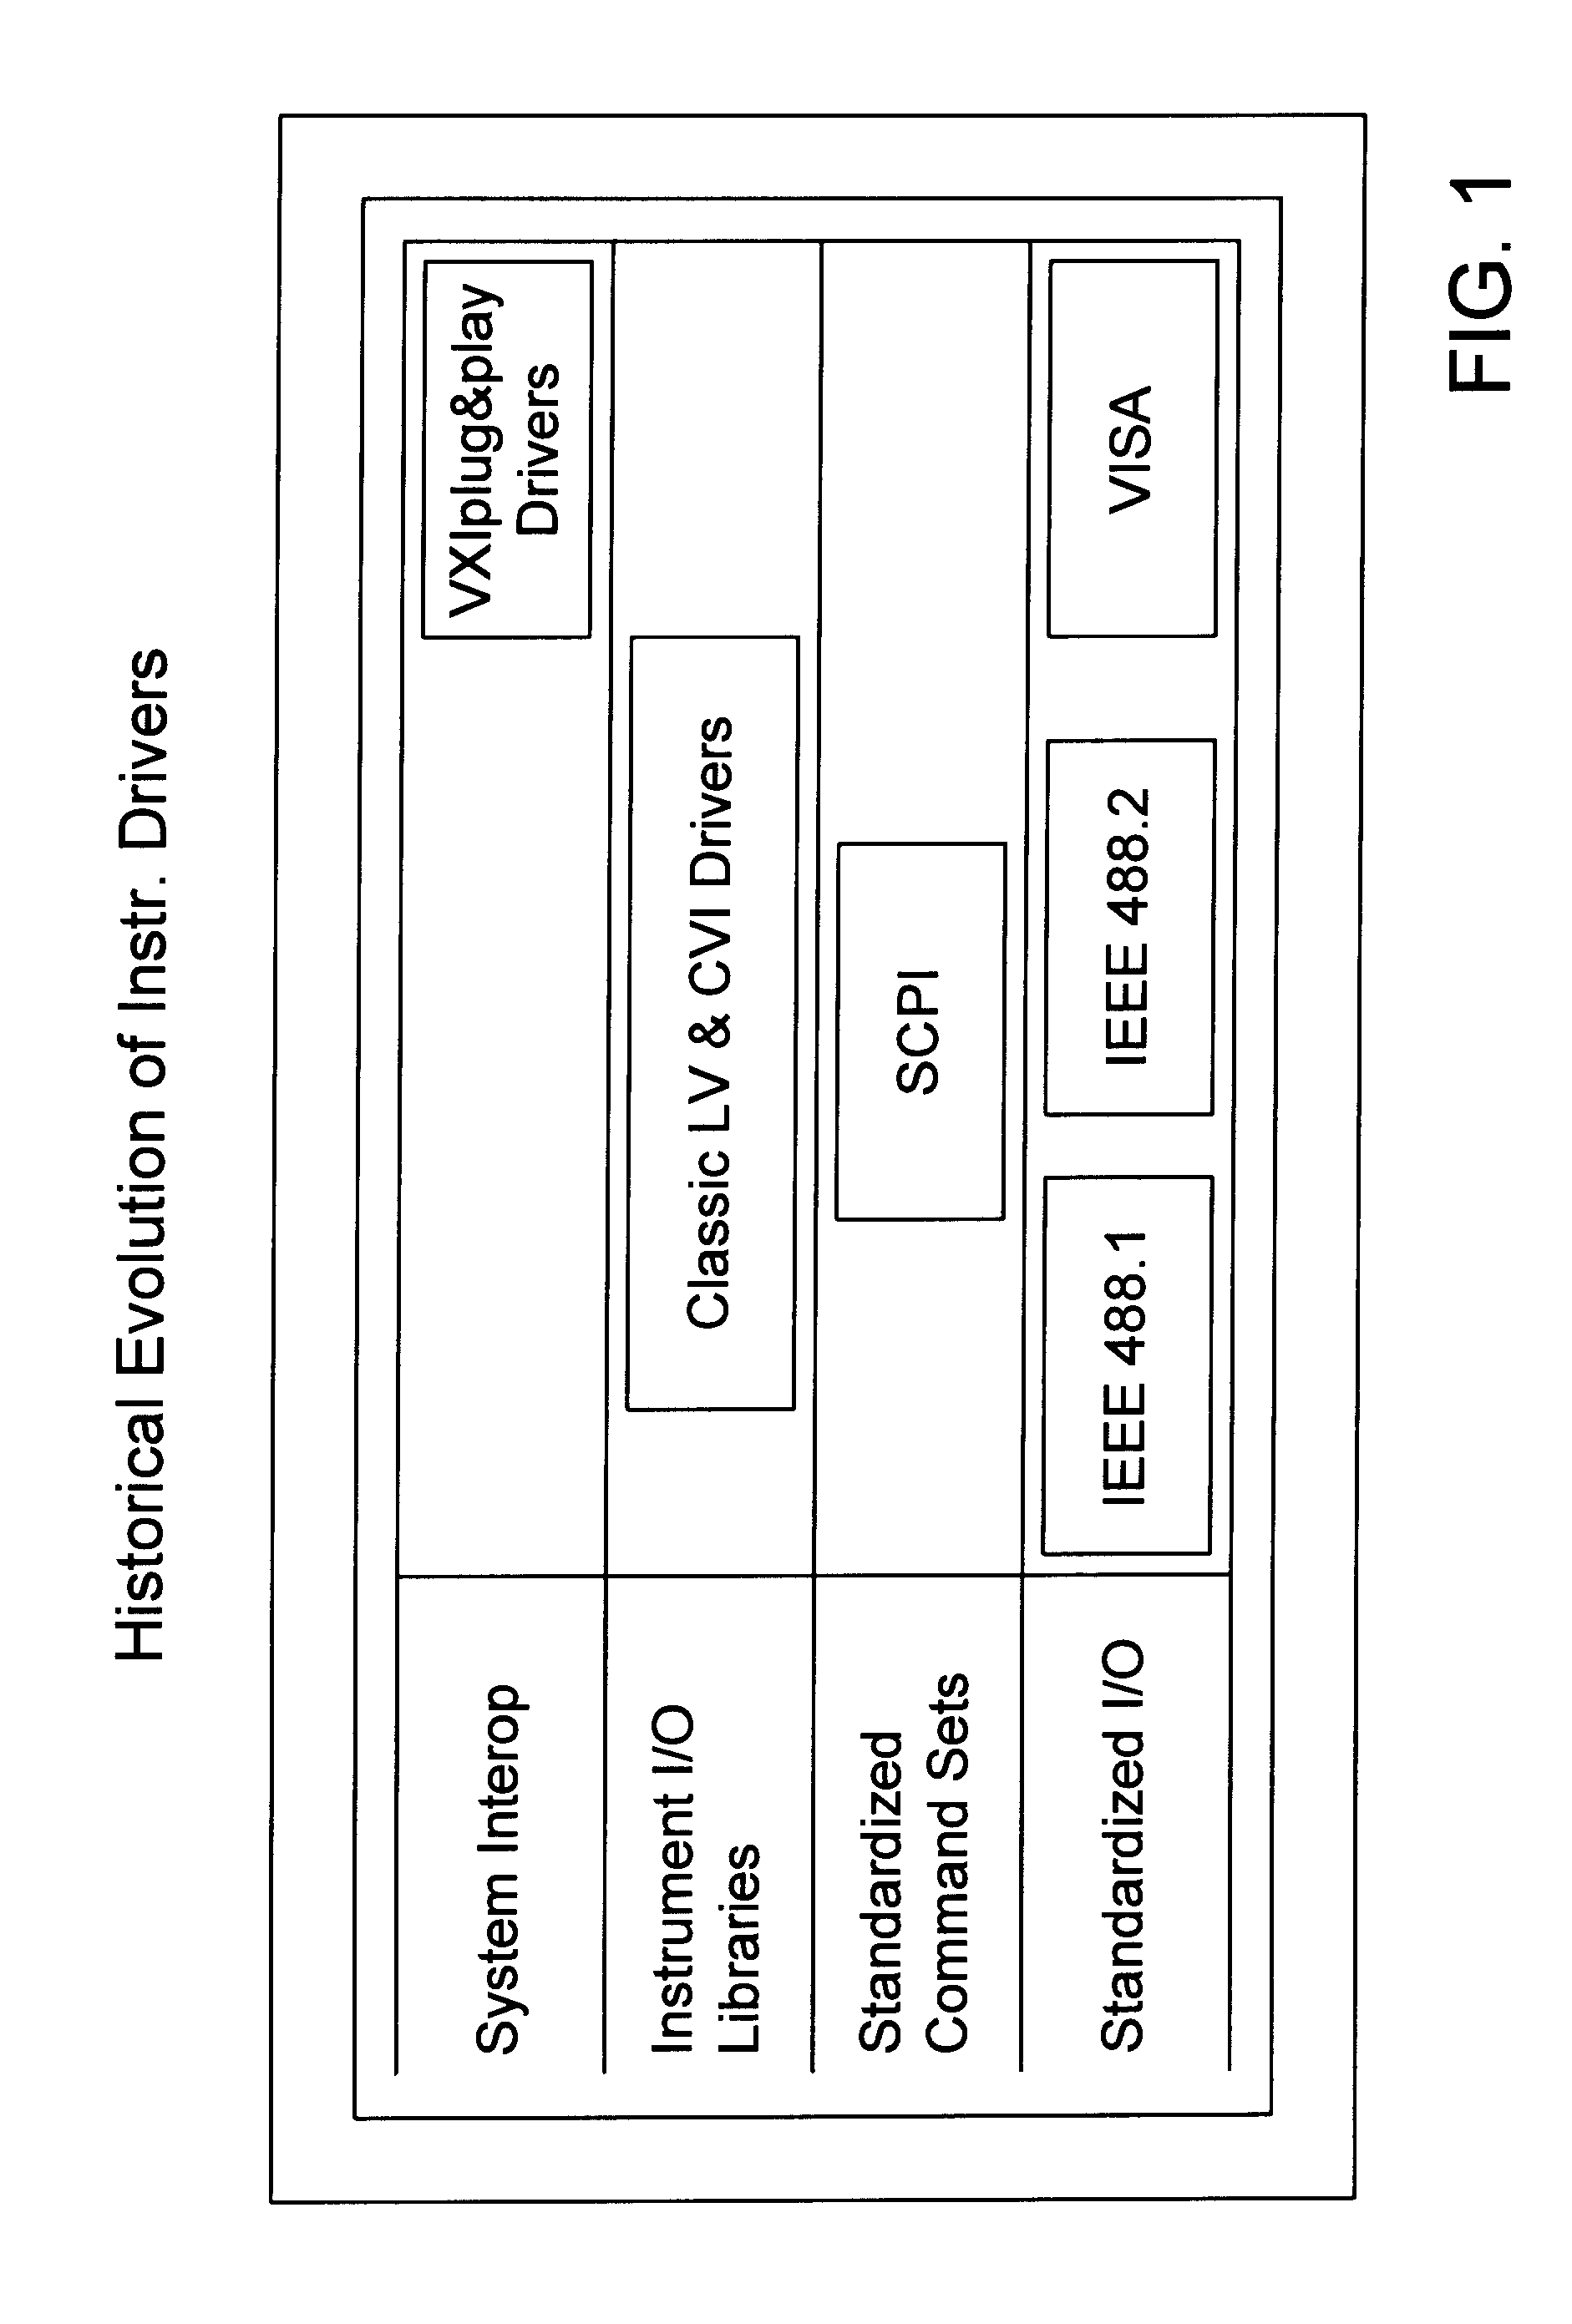 Instrumentation system and method including an improved driver software architecture